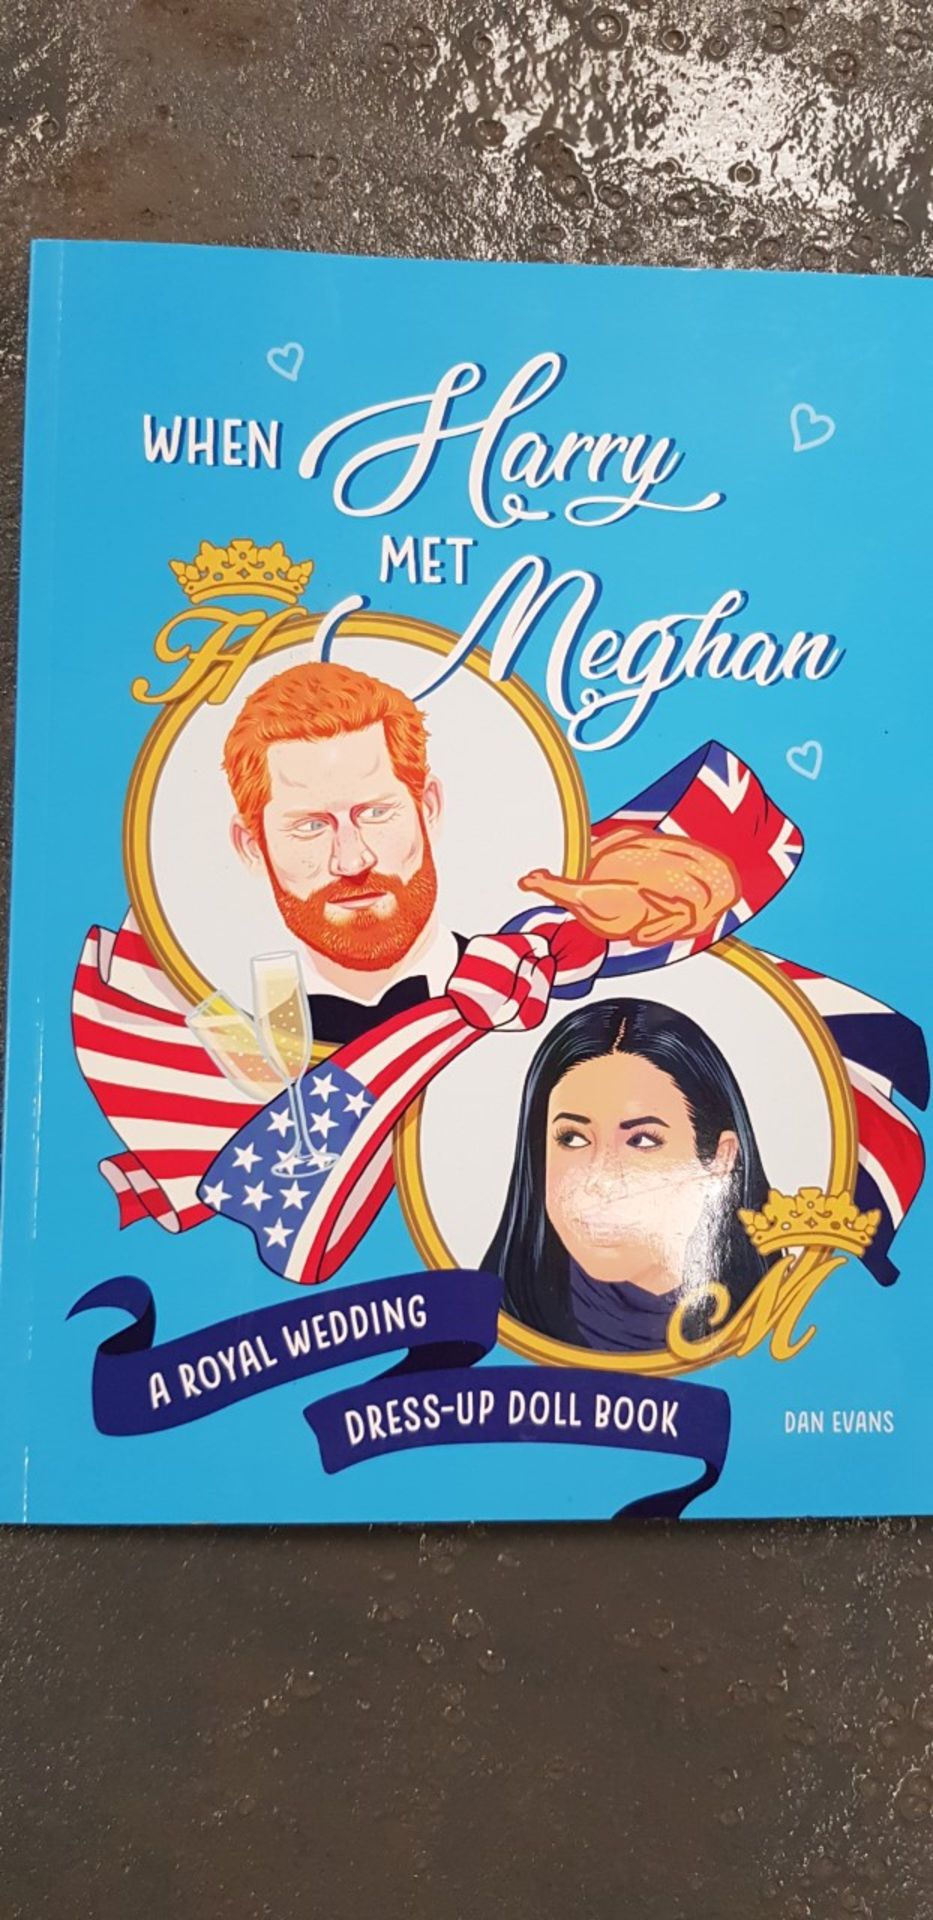 100 When Harry met Meghan A Royal wedding dress up doll book - Image 2 of 2